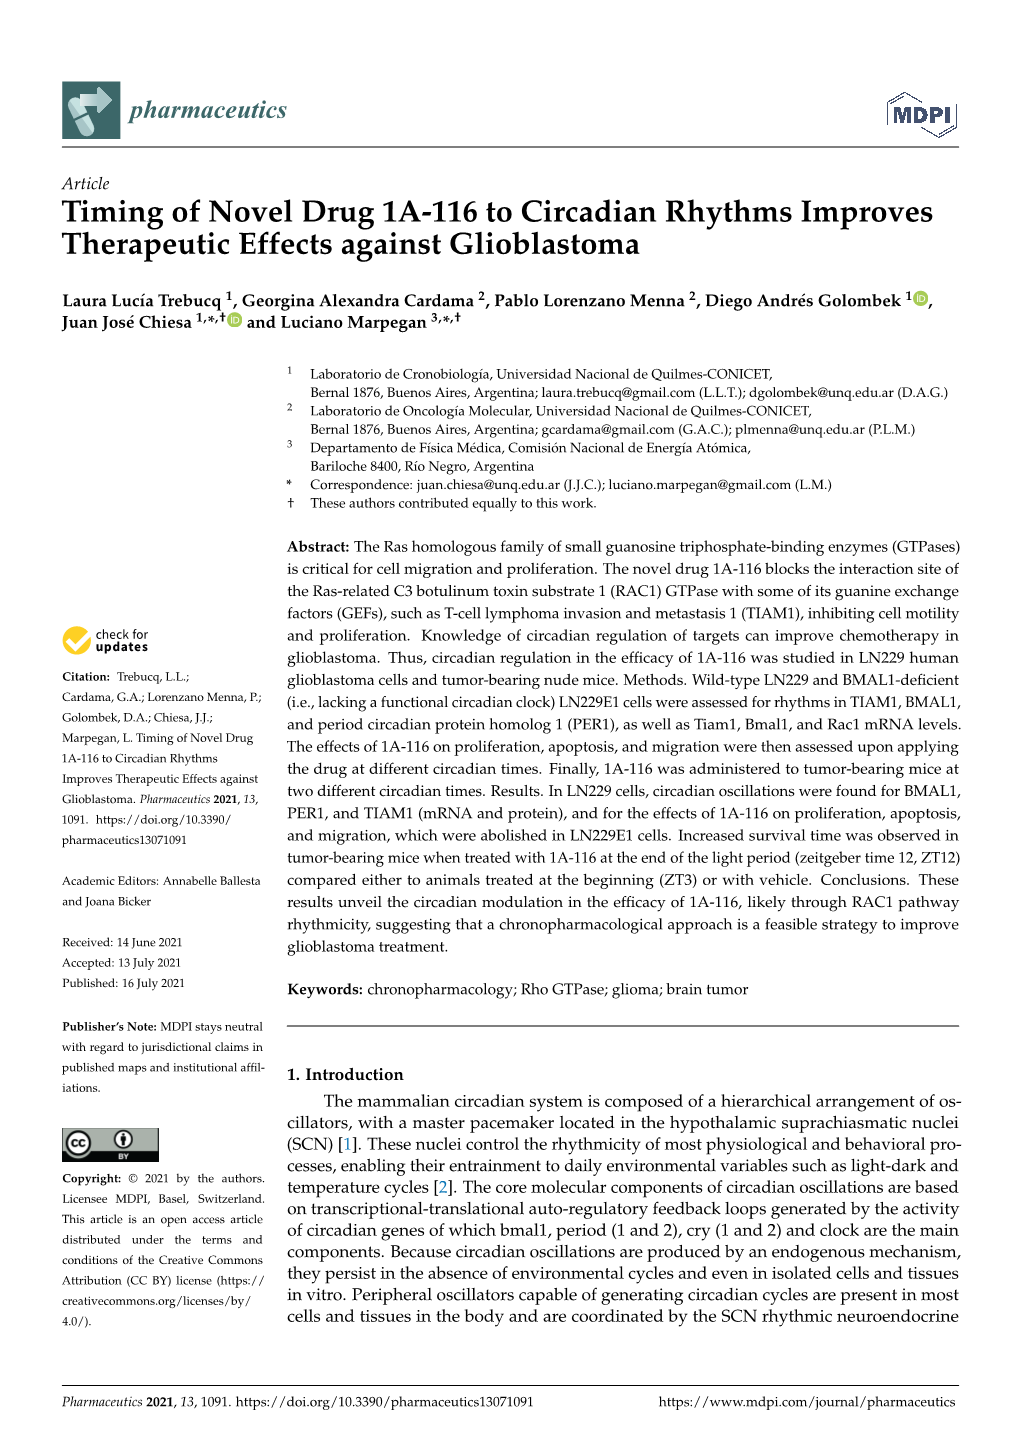 Timing of Novel Drug 1A-116 to Circadian Rhythms Improves Therapeutic Effects Against Glioblastoma